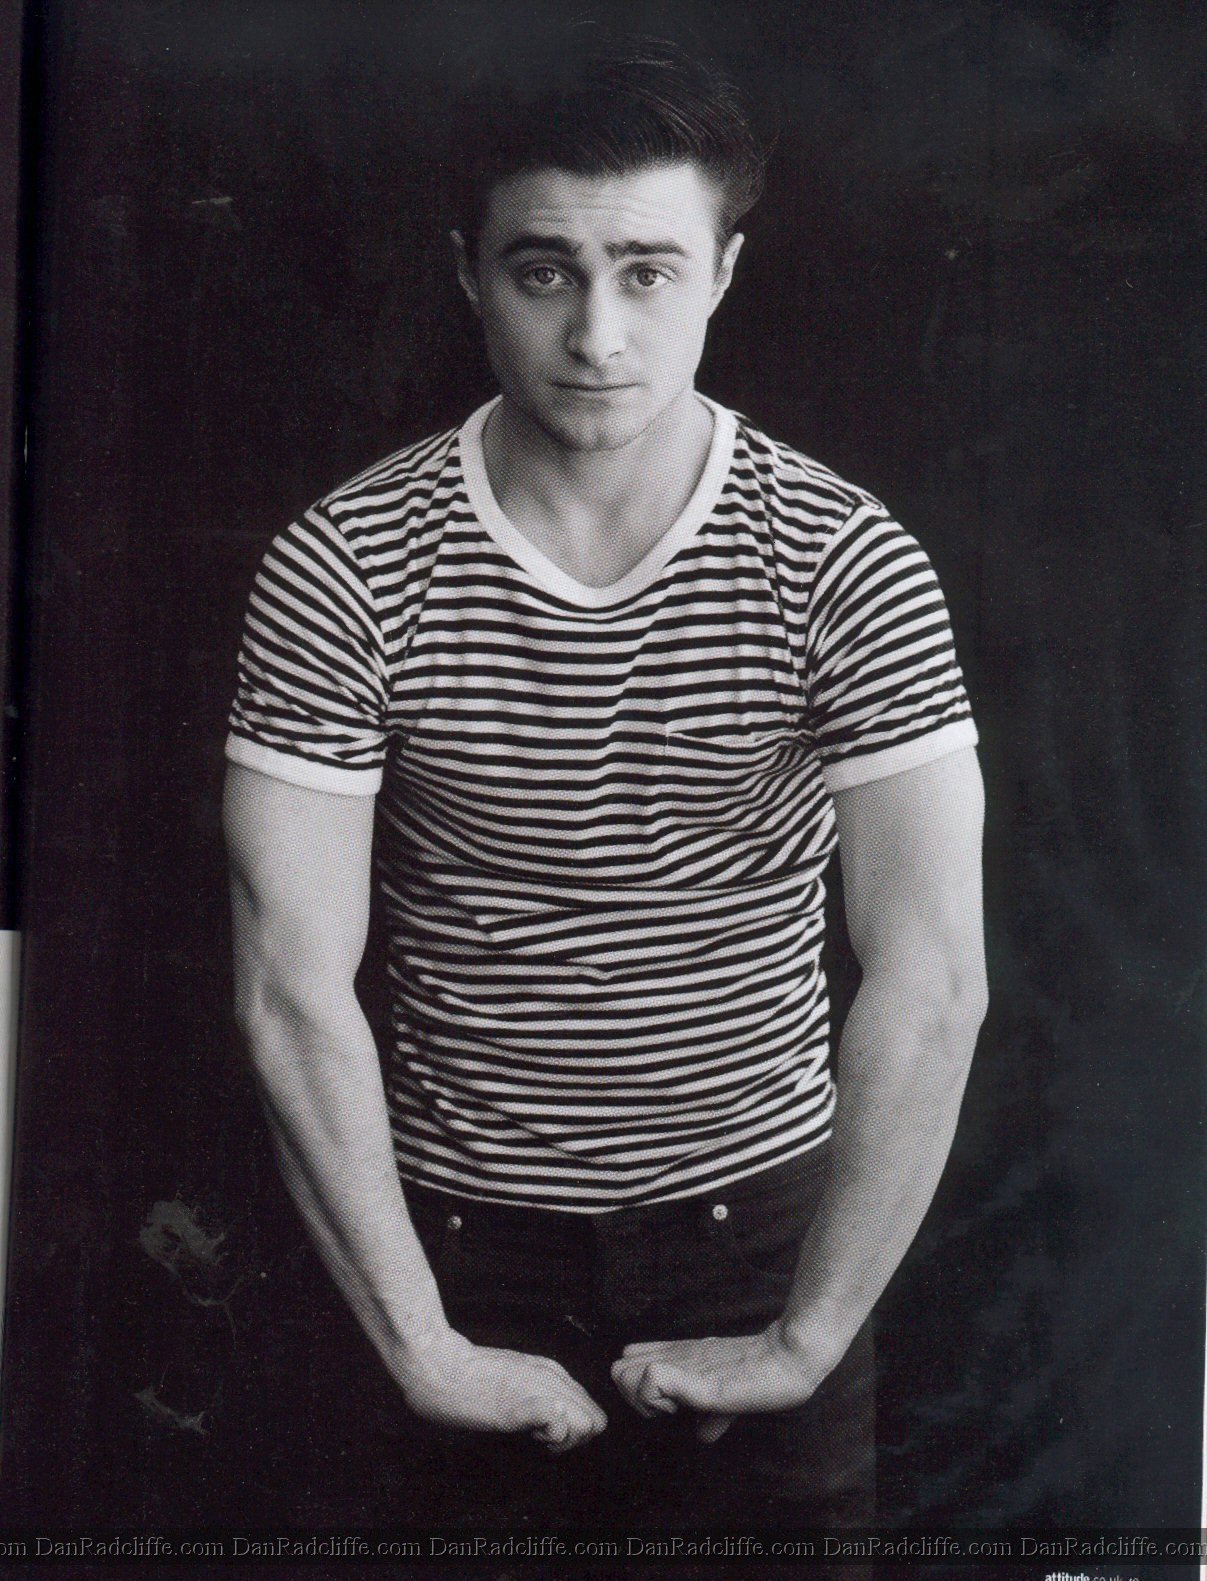 Daniel Radcliffe - Images Gallery